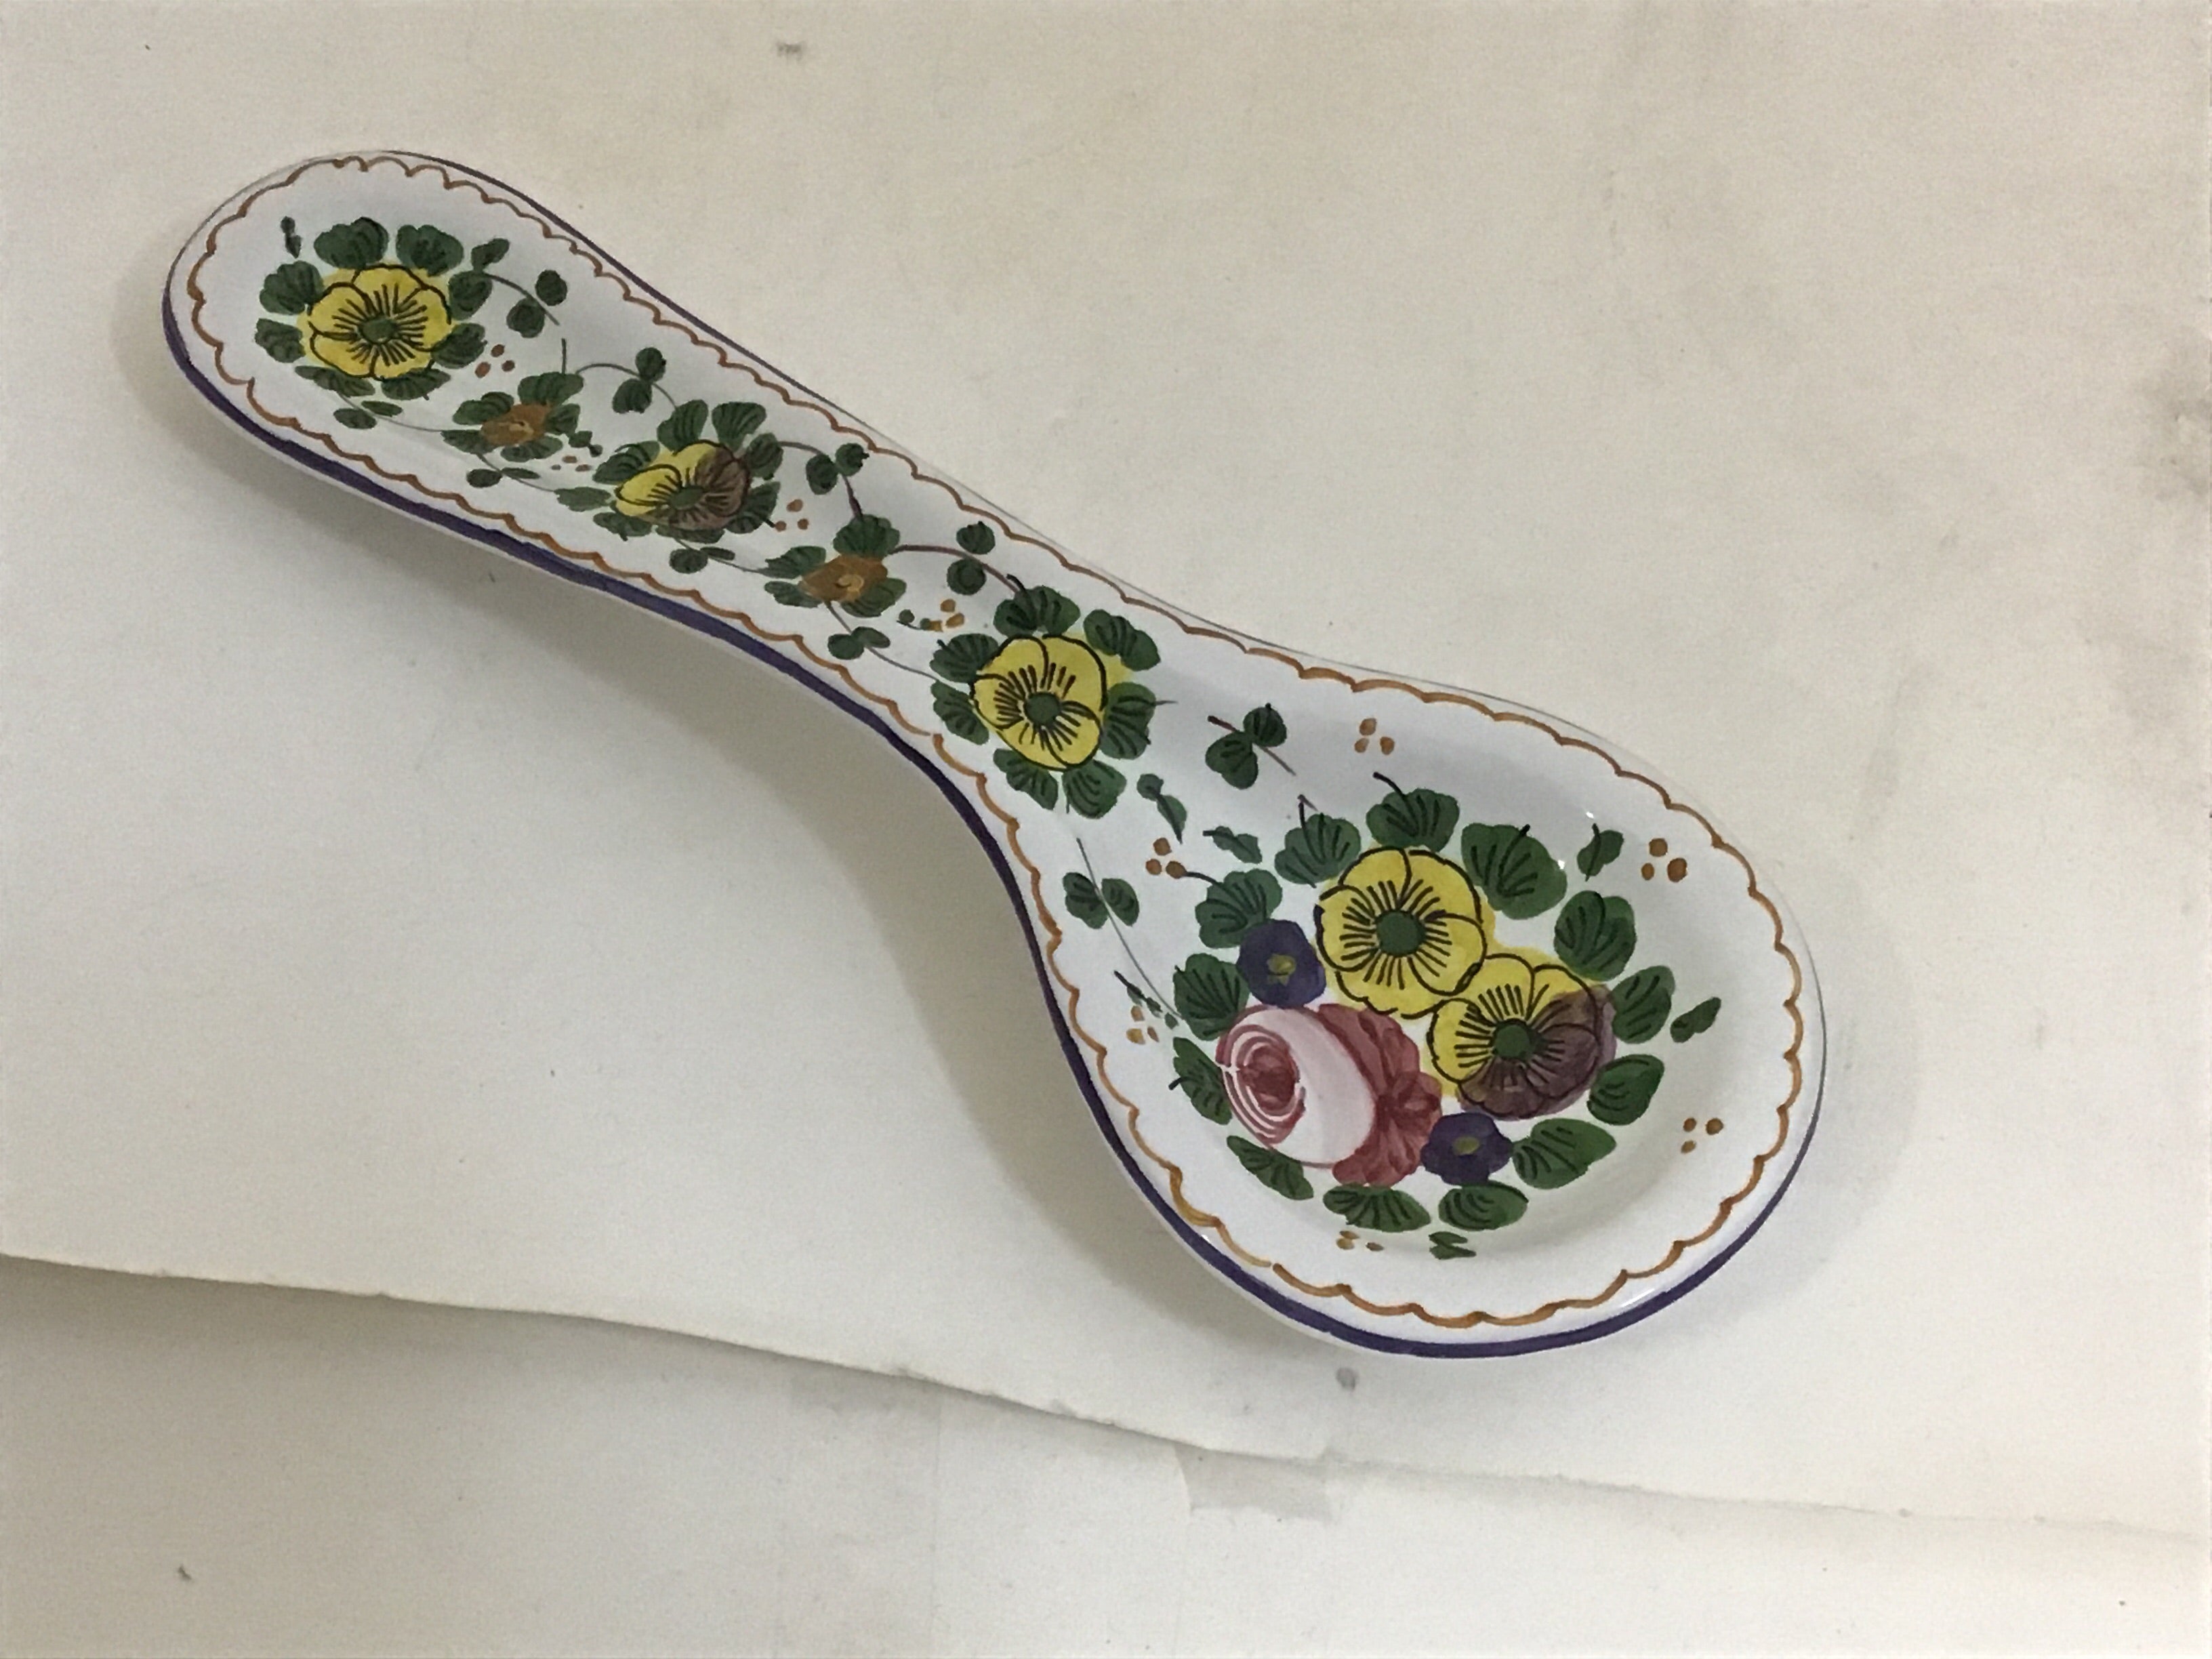 Rosa Utensil - Spoon Rest, ceramics, pottery, italian design, majolica, handmade, handcrafted, handpainted, home decor, kitchen art, home goods, deruta, majolica, Artisan, treasures, traditional art, modern art, gift ideas, style, SF, shop small business, artists, shop online, landmark store, legacy, one of a kind, limited edition, gift guide, gift shop, retail shop, decorations, shopping, italy, home staging, home decorating, home interiors